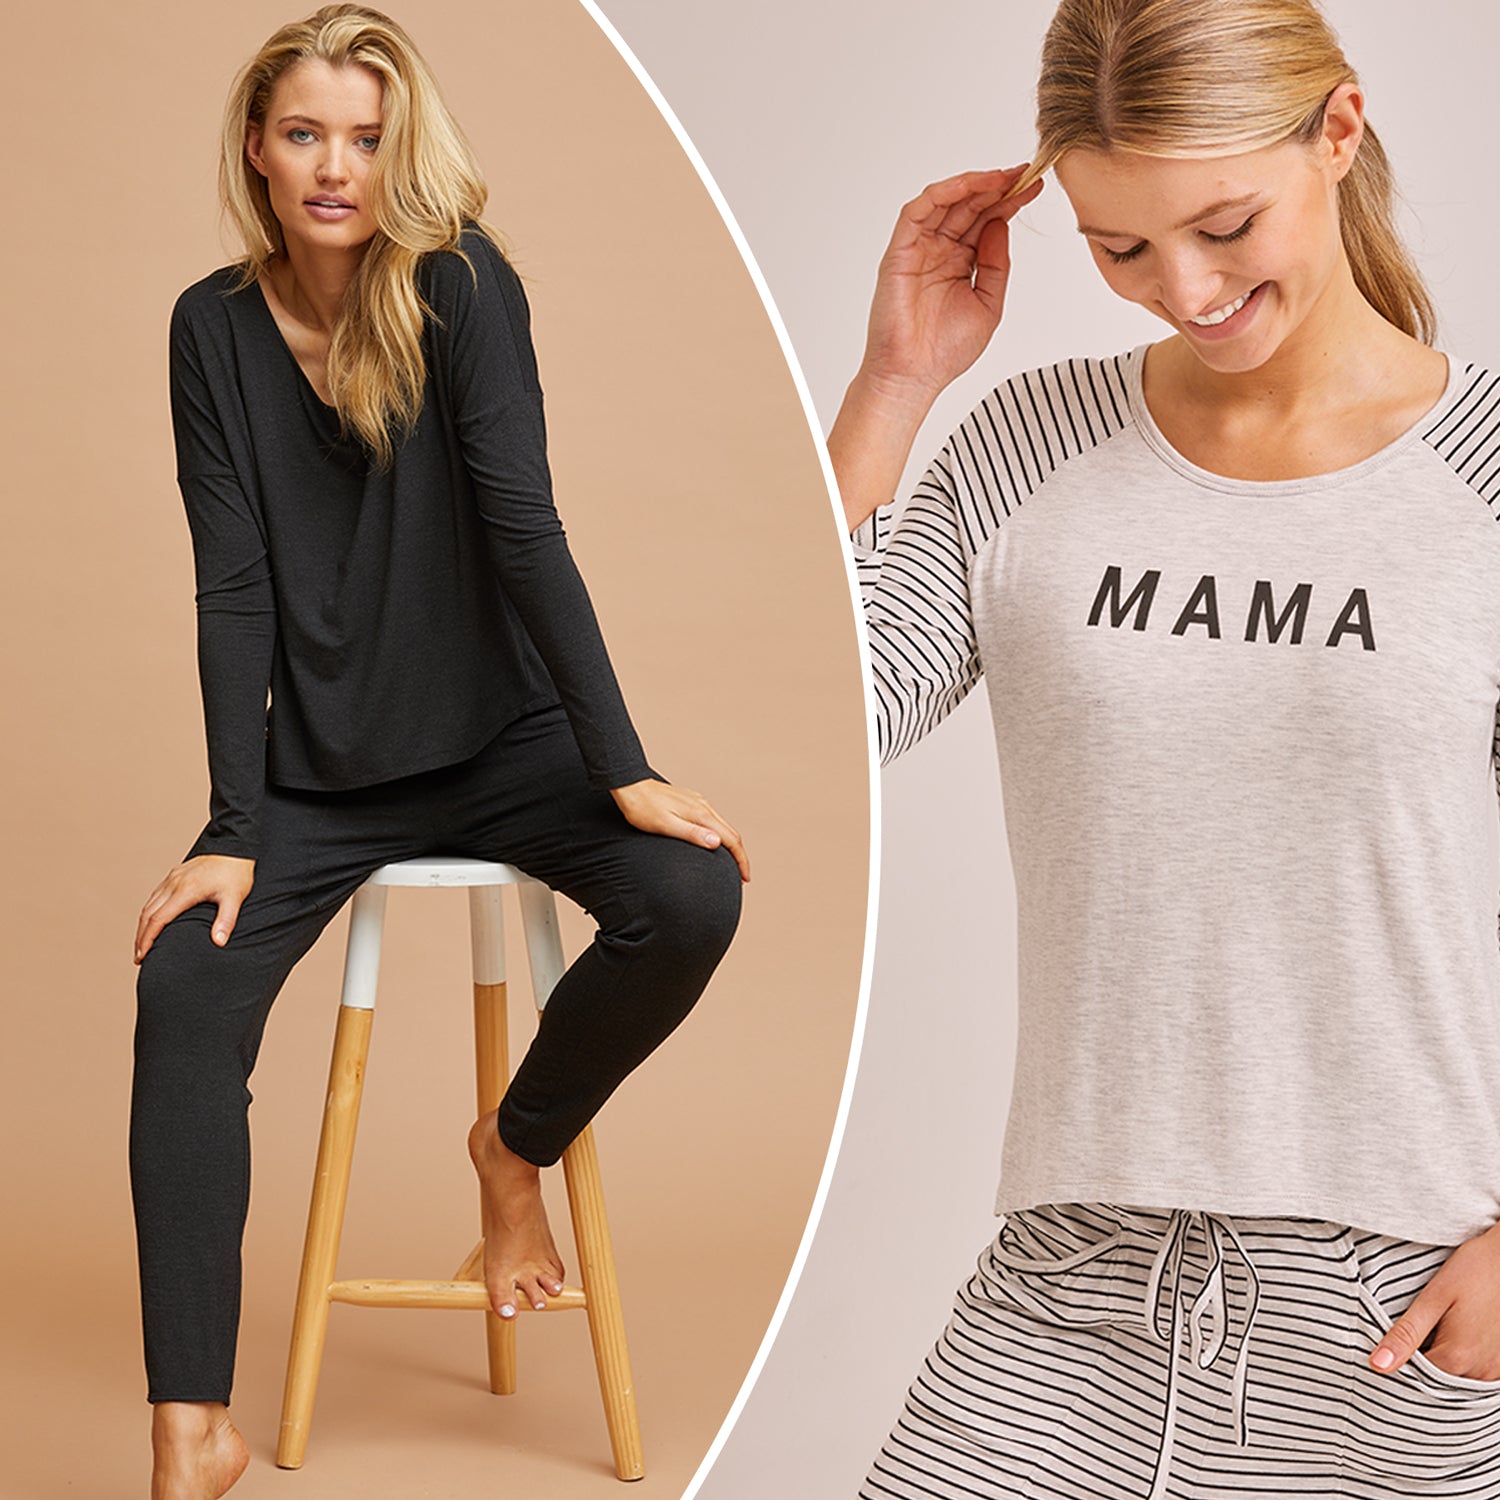 Five New Mum Must Haves for Five Minute Style